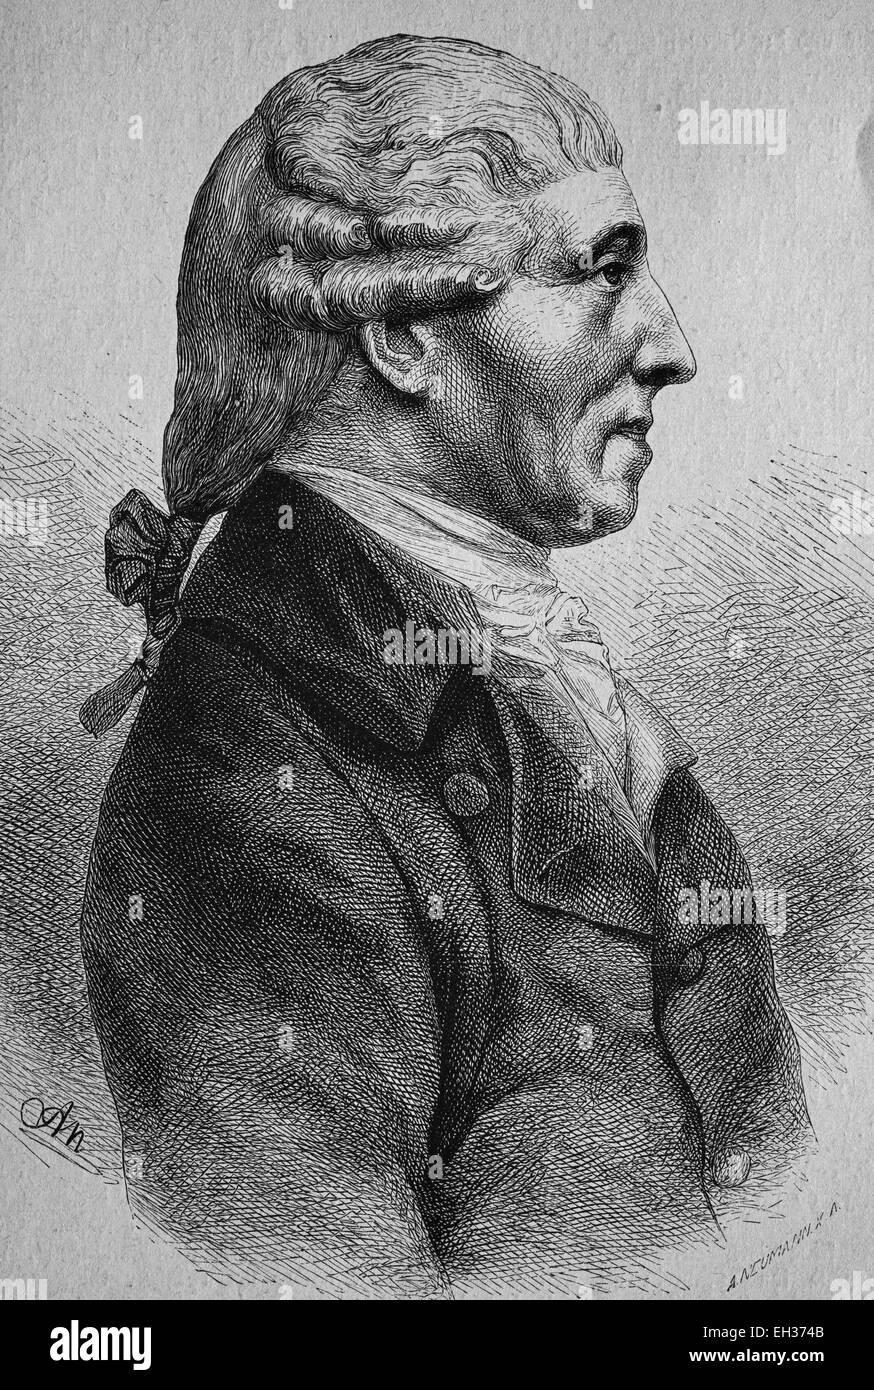 Franz Joseph Haydn, 1732 - 1809, Austrian composer and leading representative of the Viennese classicism, wood engraving, 1880 Stock Photo